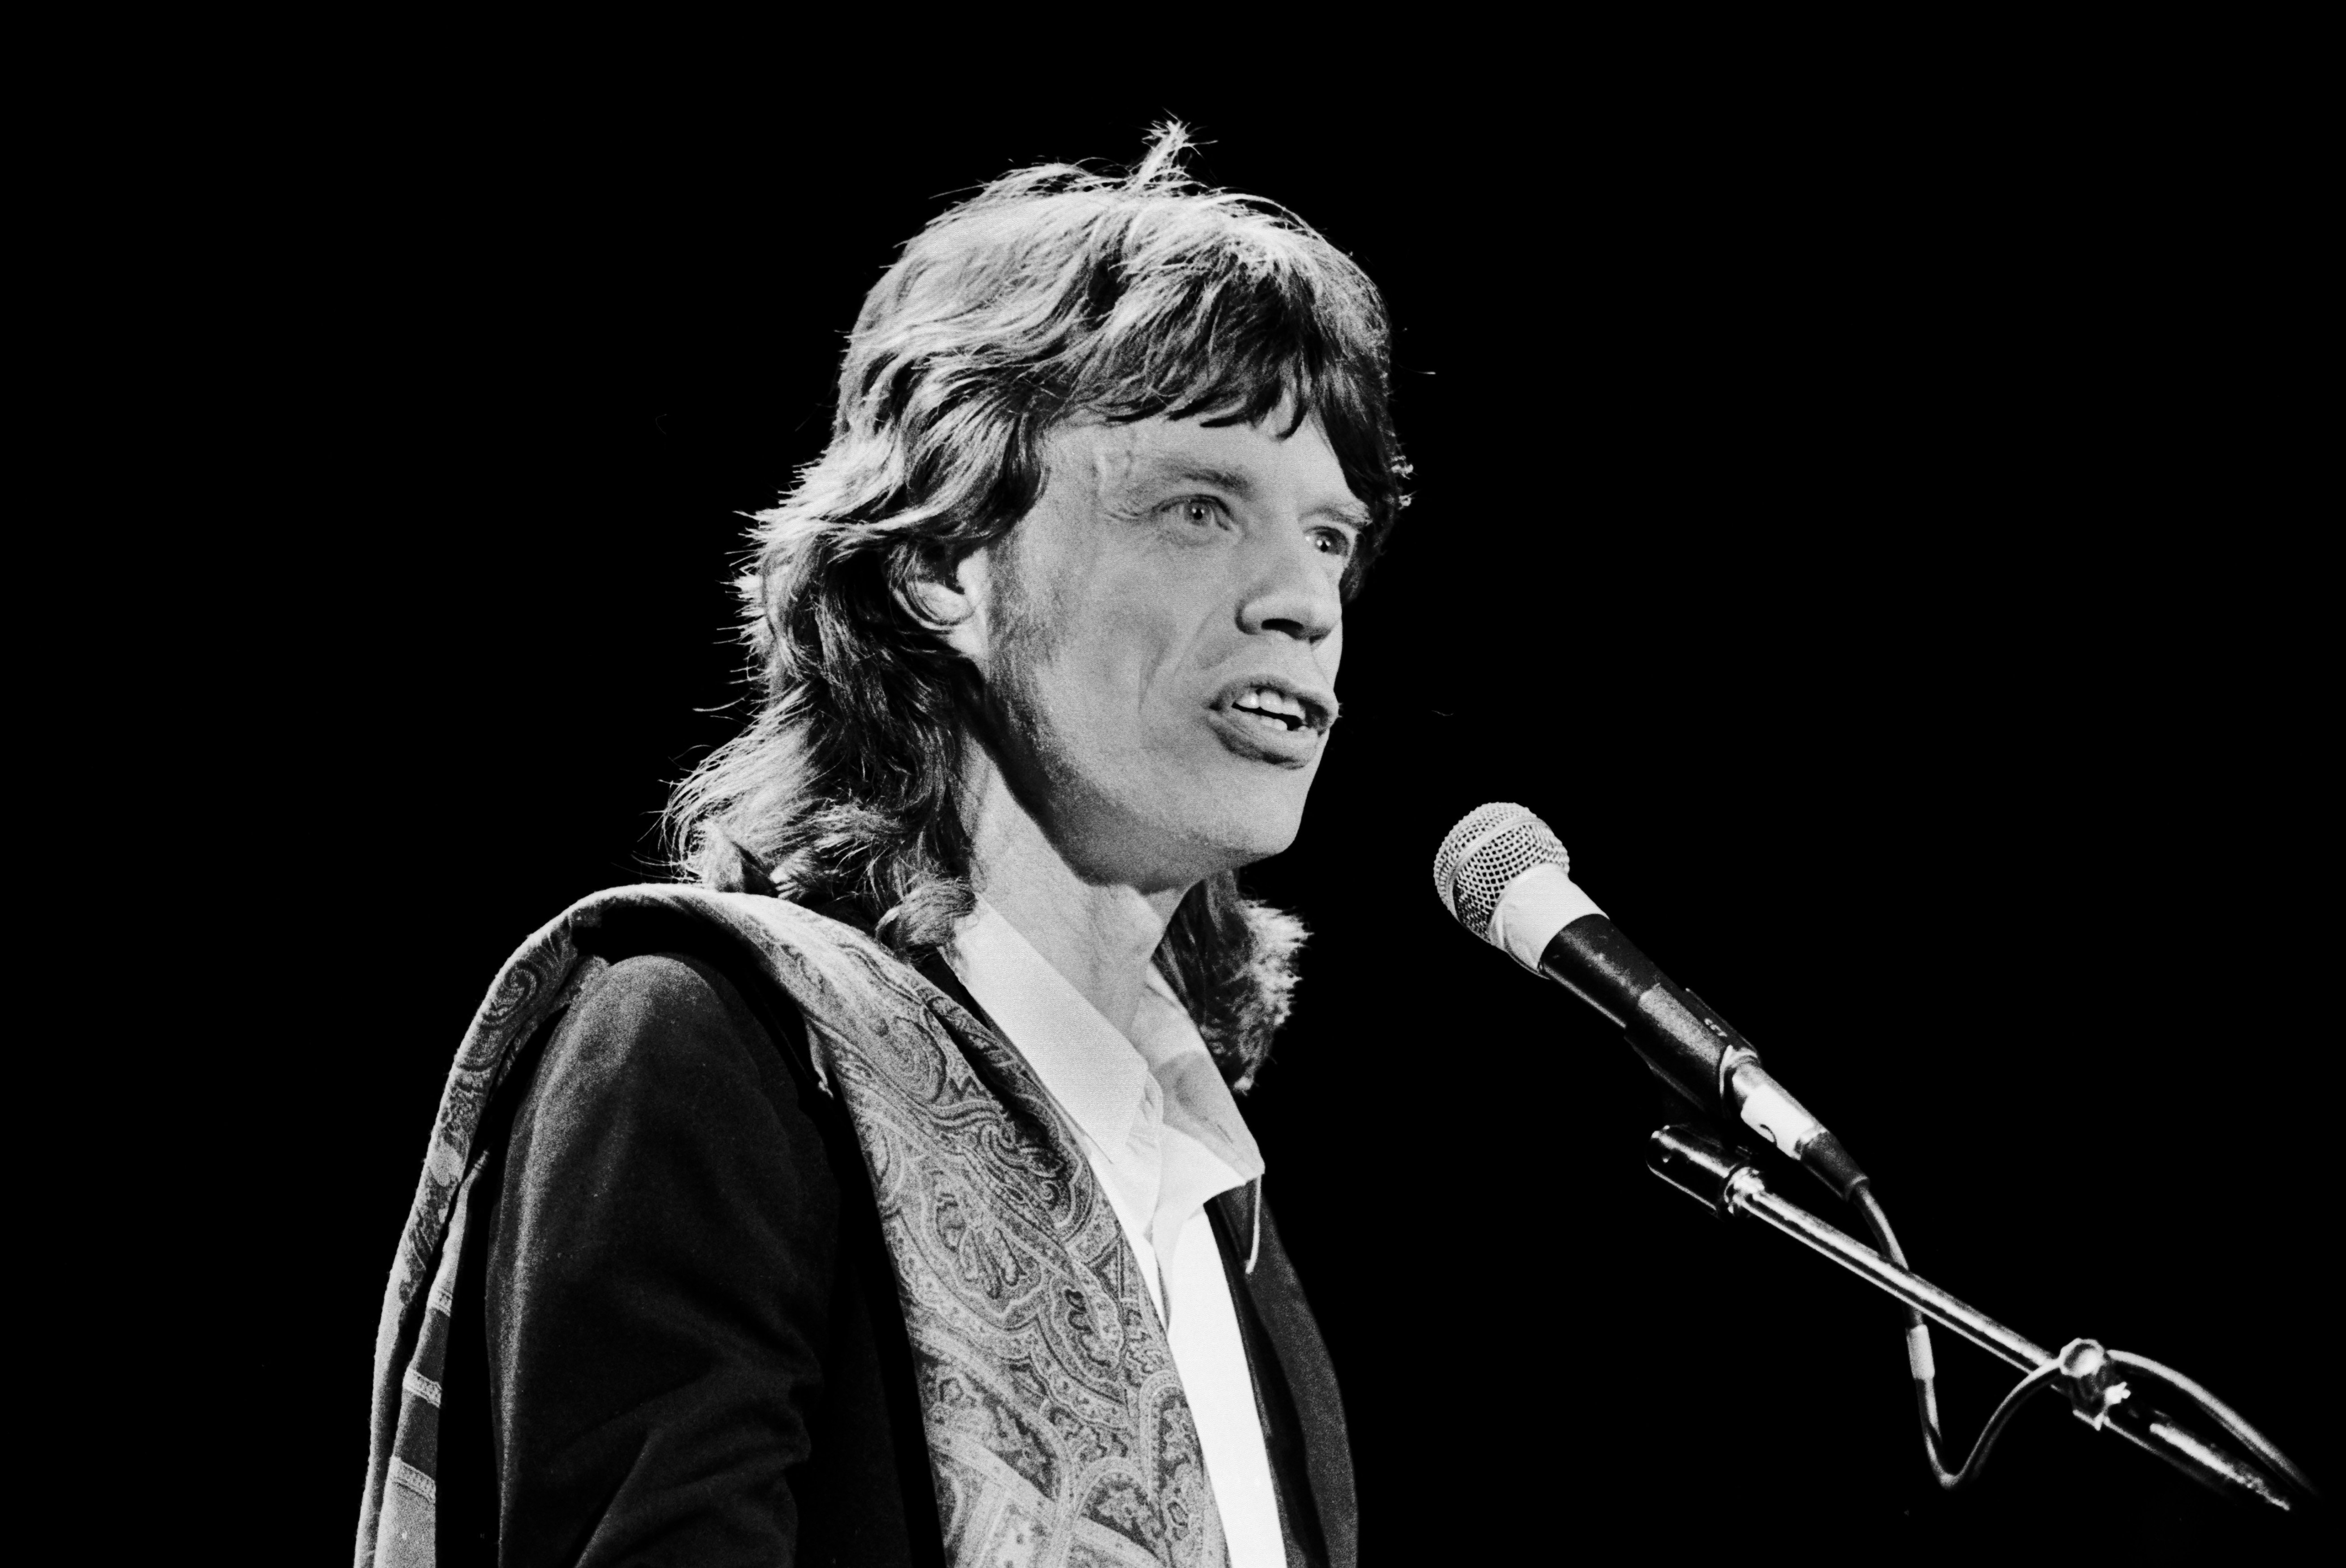 Mick Jagger inducts The Beatles into the Rock and Roll Hall of Fame in New York City